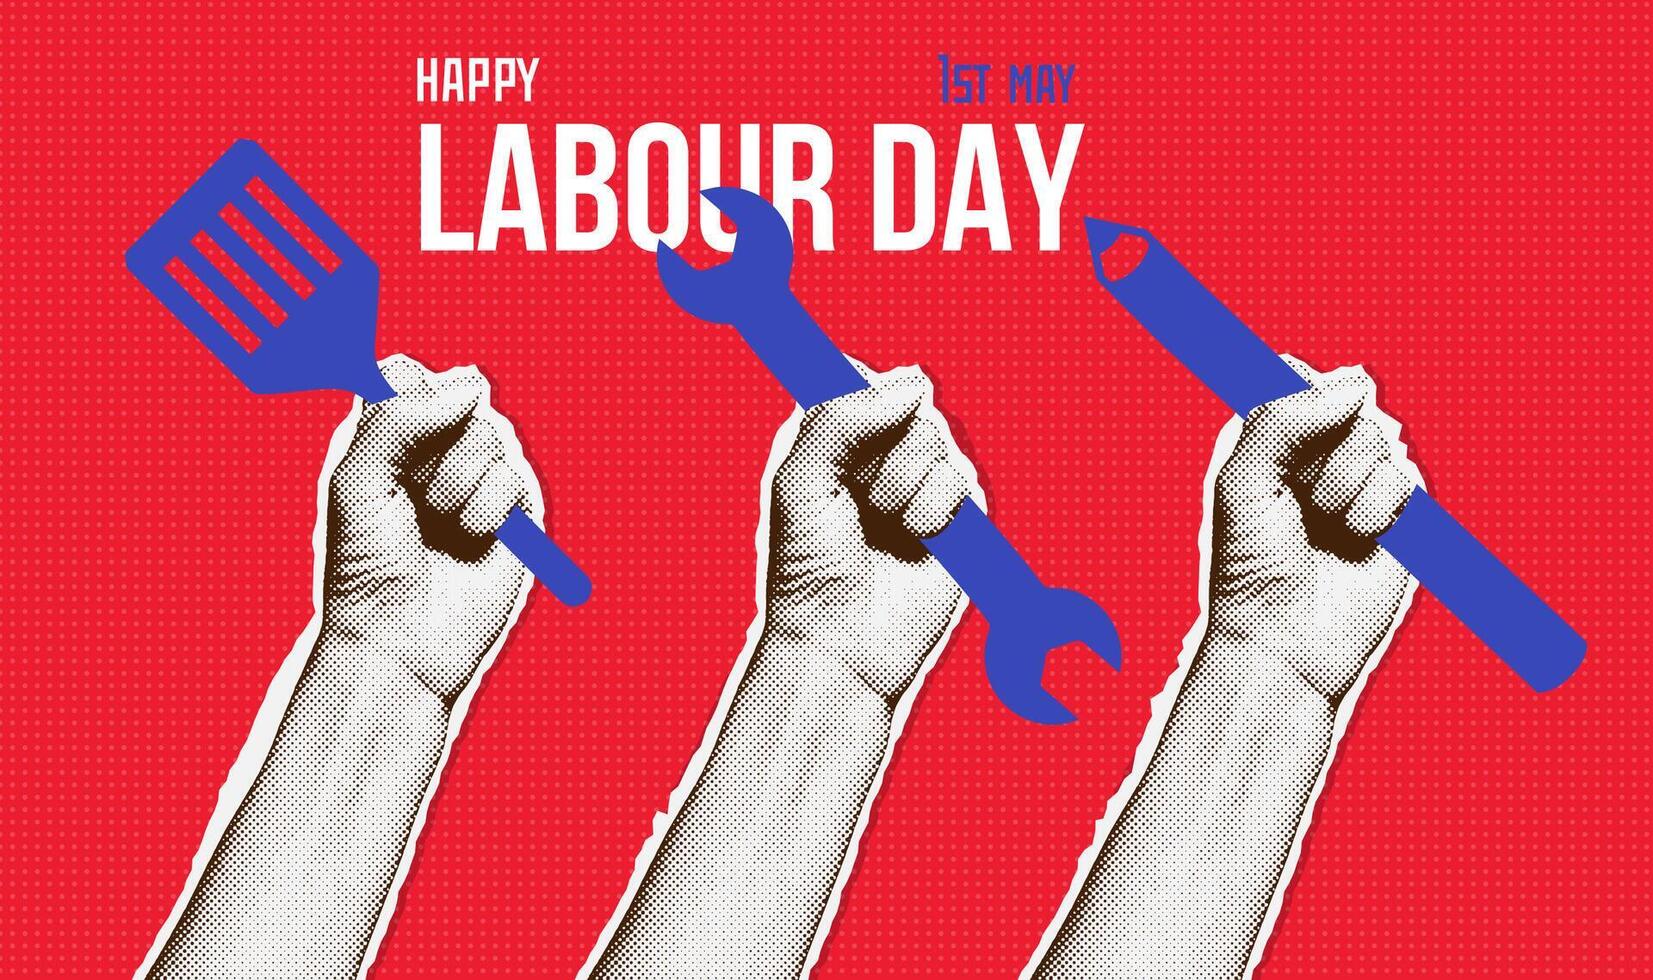 Happy Labour day greeting card template with people hands holding kitchen spatula, pencil, wrench. Modern halftone collage vector illustration design on red rays background.